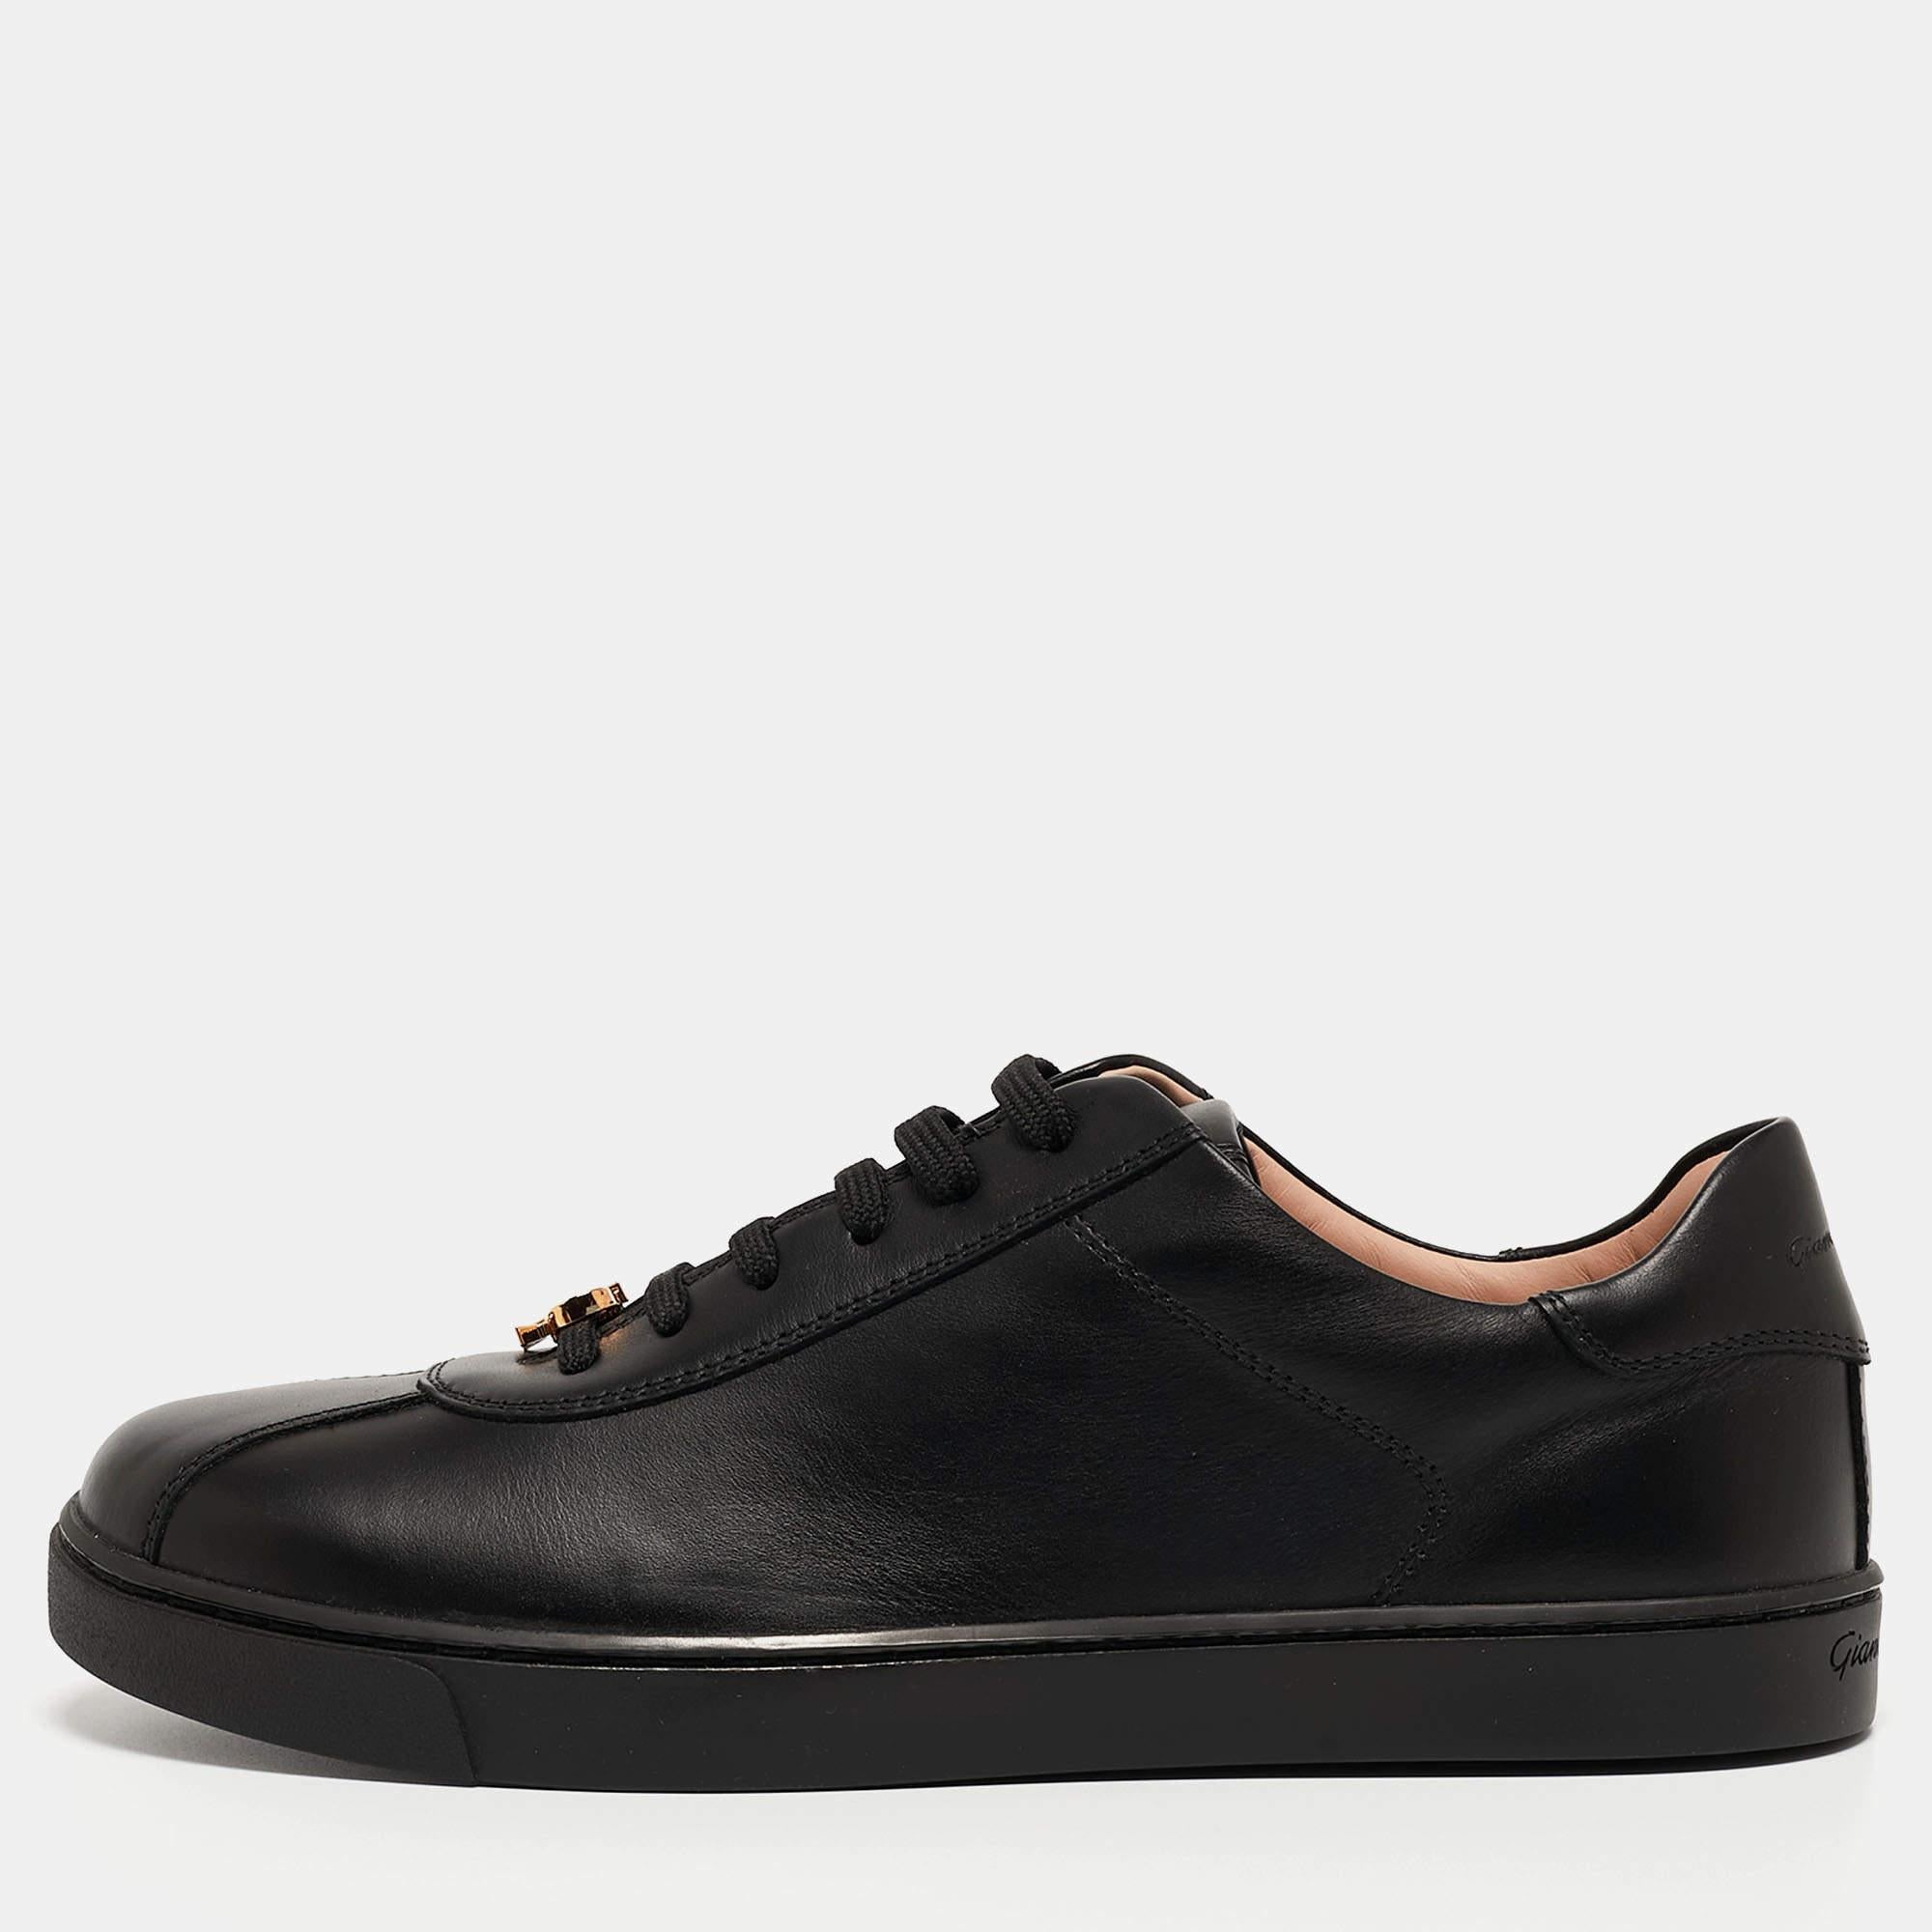 Gianvito Rossi Black Leather Low Top Sneakers Size 37.5 For Sale